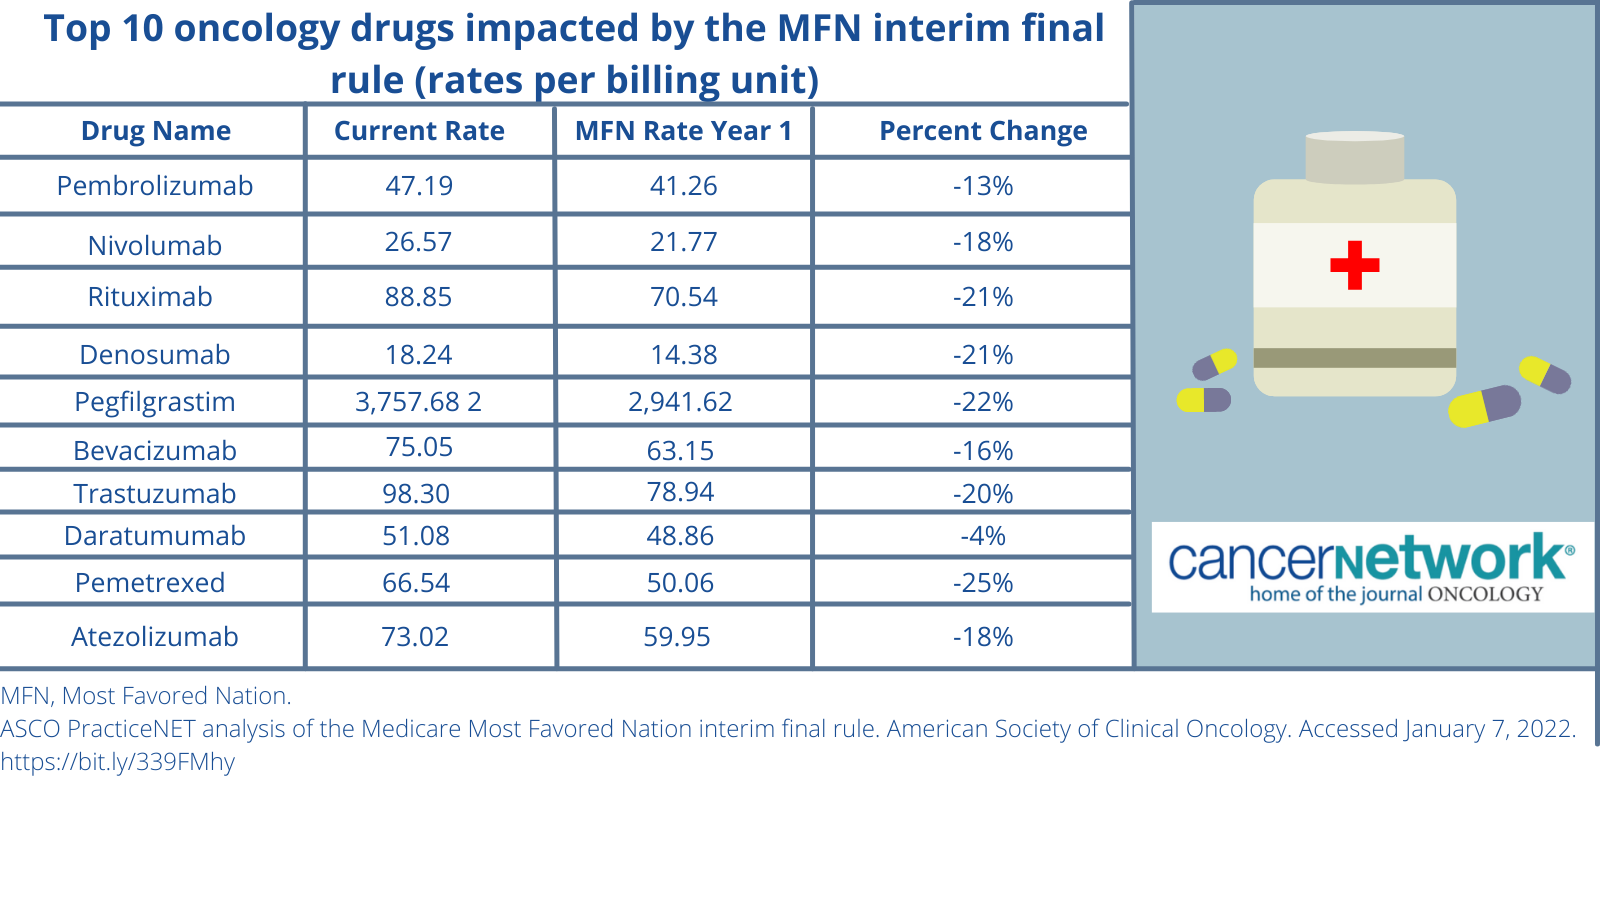 Top 10 oncology drugs impacted by the MFN interim final rule (rates per billing unit)